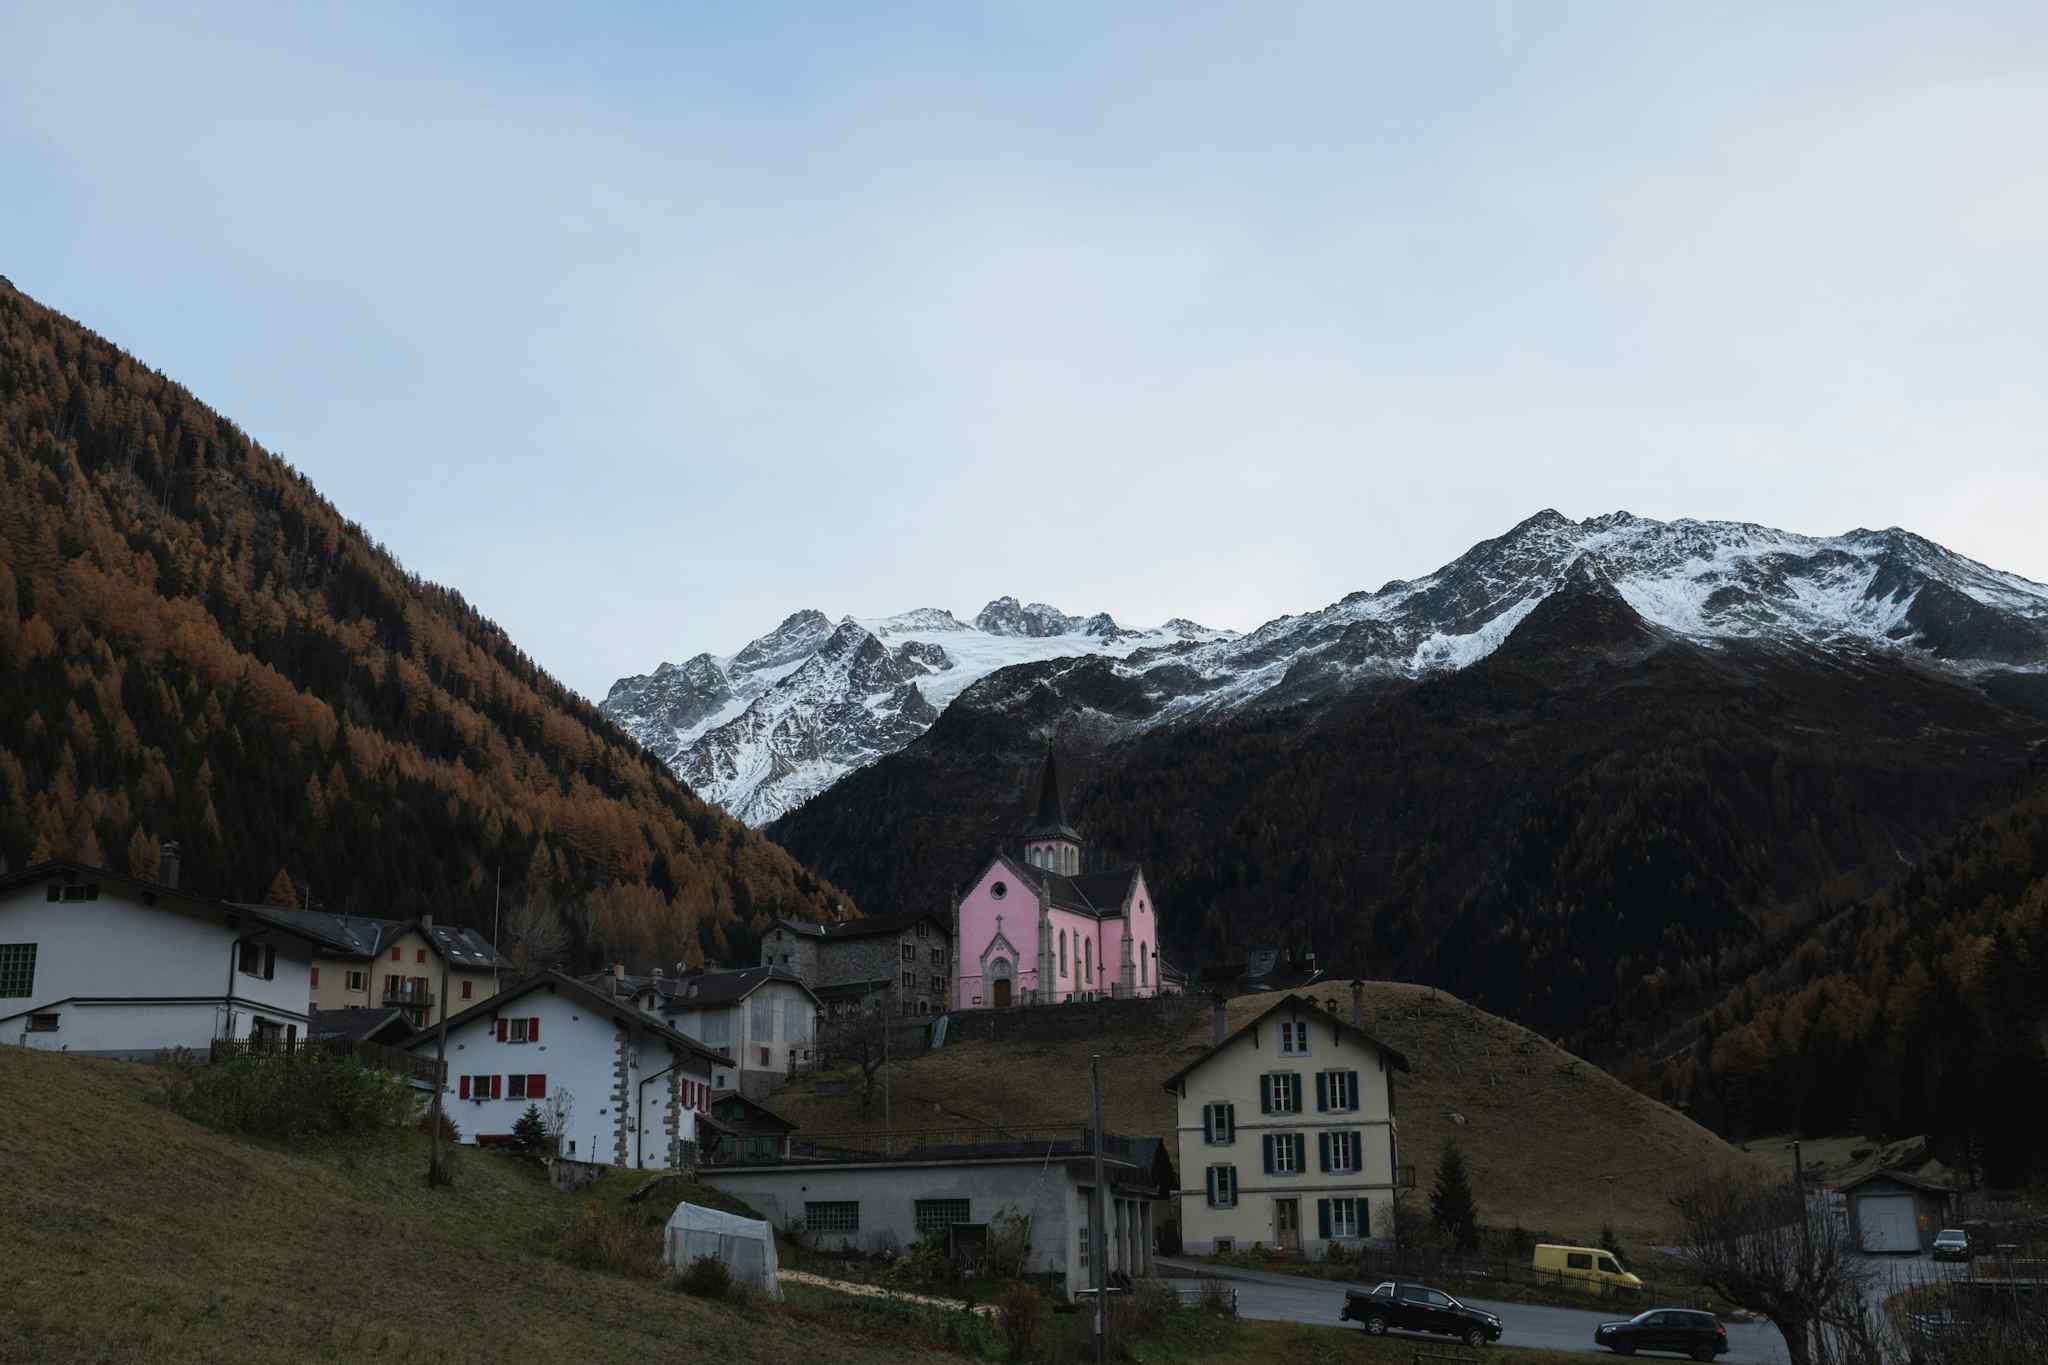 The small Alpine village of Trient, with its distinctive pink church. Photo: Getty.